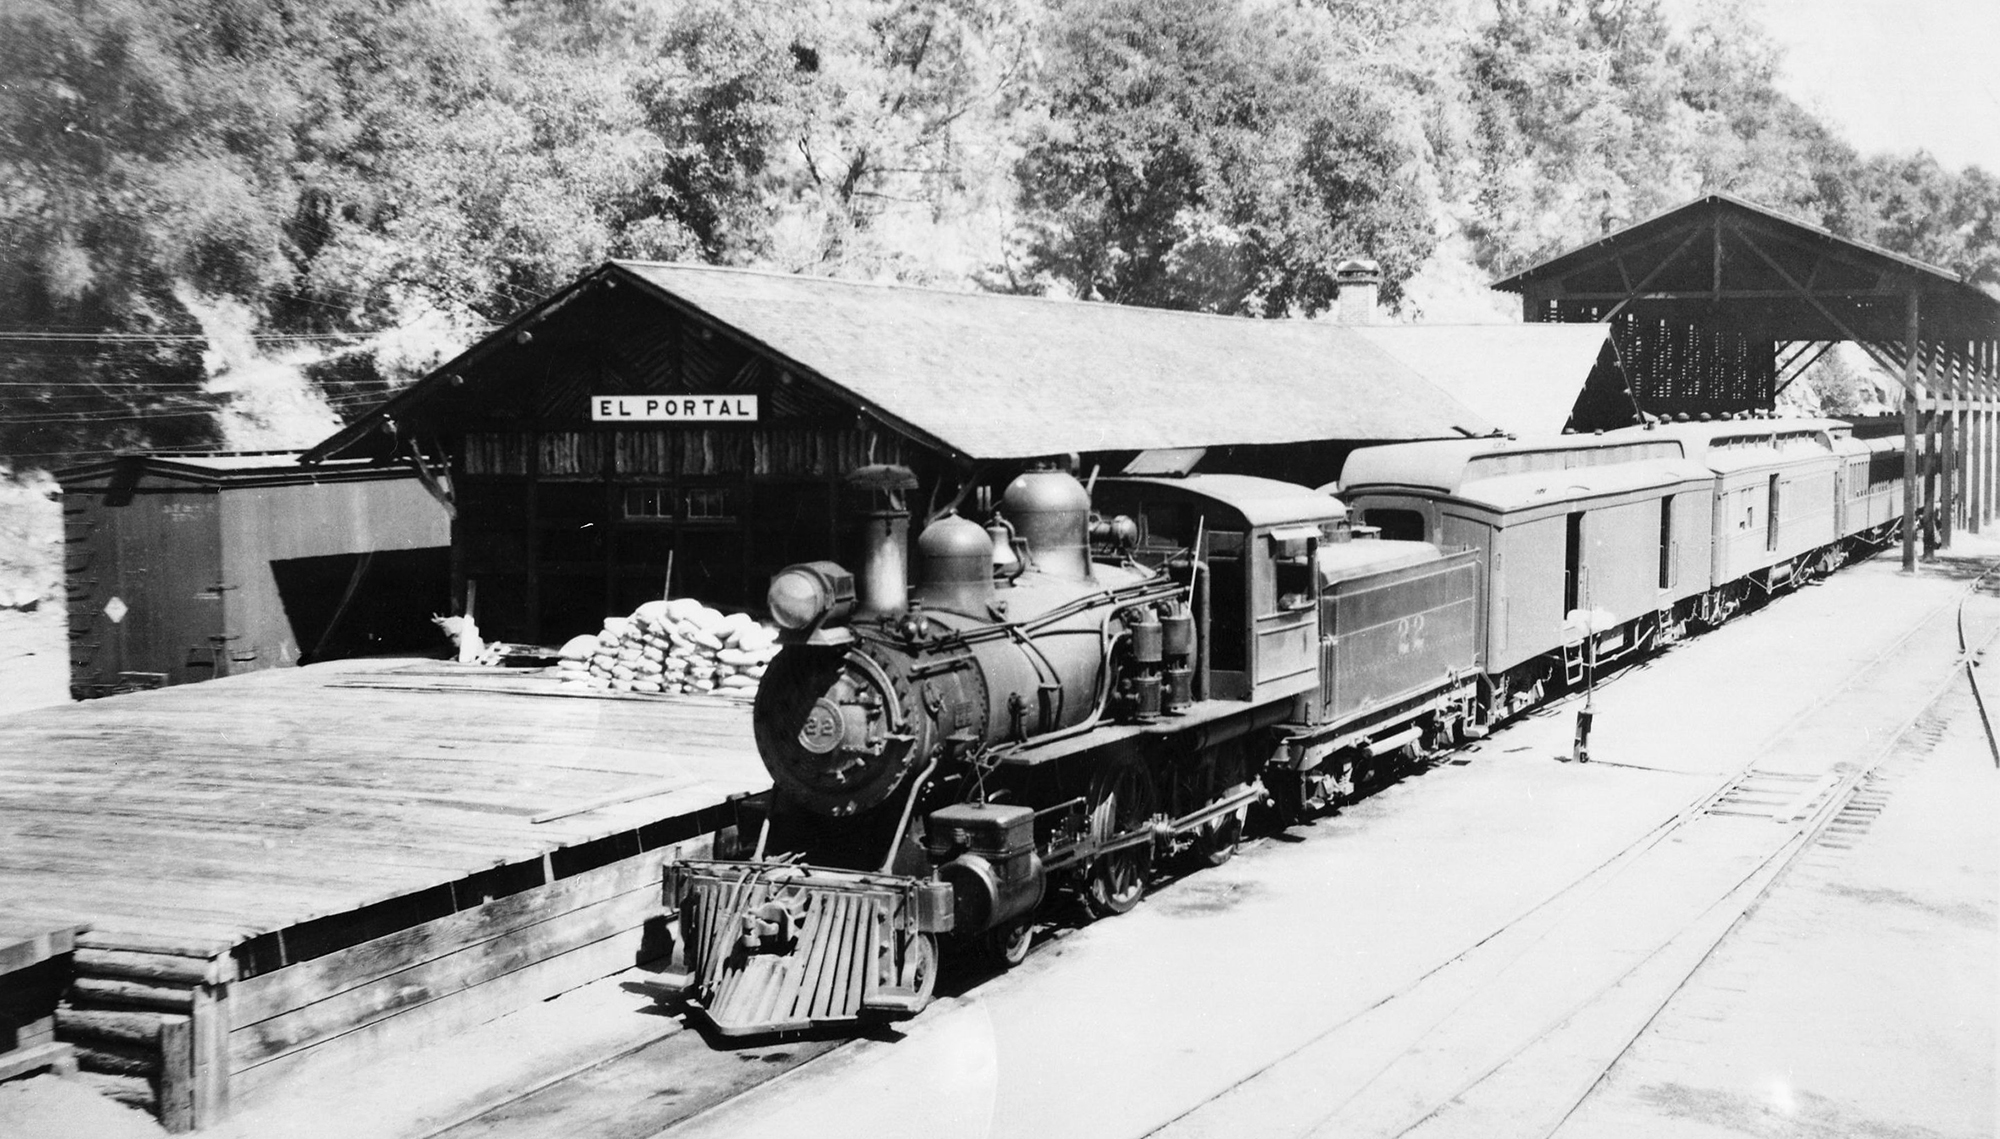 A black and white photo of a steam locomotive at the El Portal train station